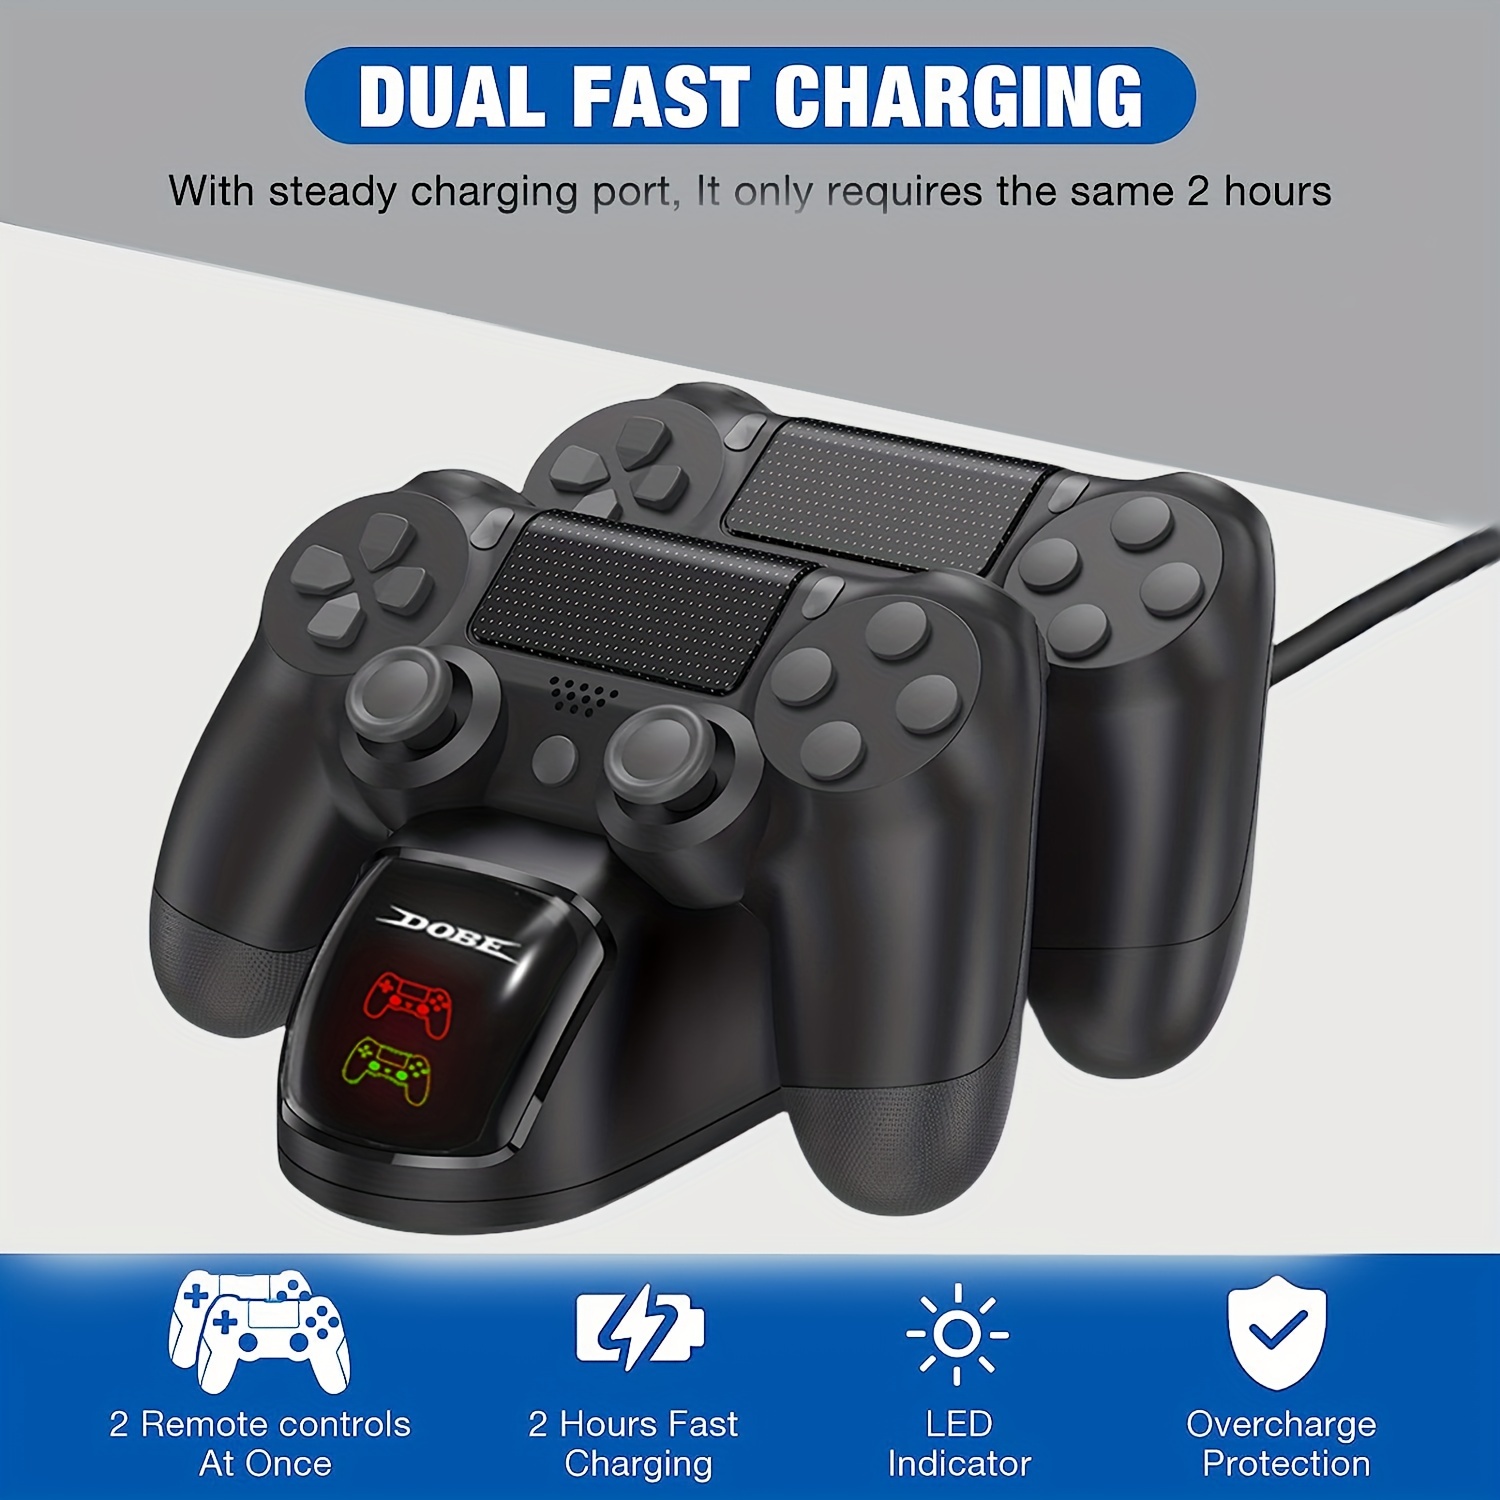  Megadream Controller Charger for PS4/PS4 Pro/PS4 Slim DualShock  4 Controller Charging Station : Video Games